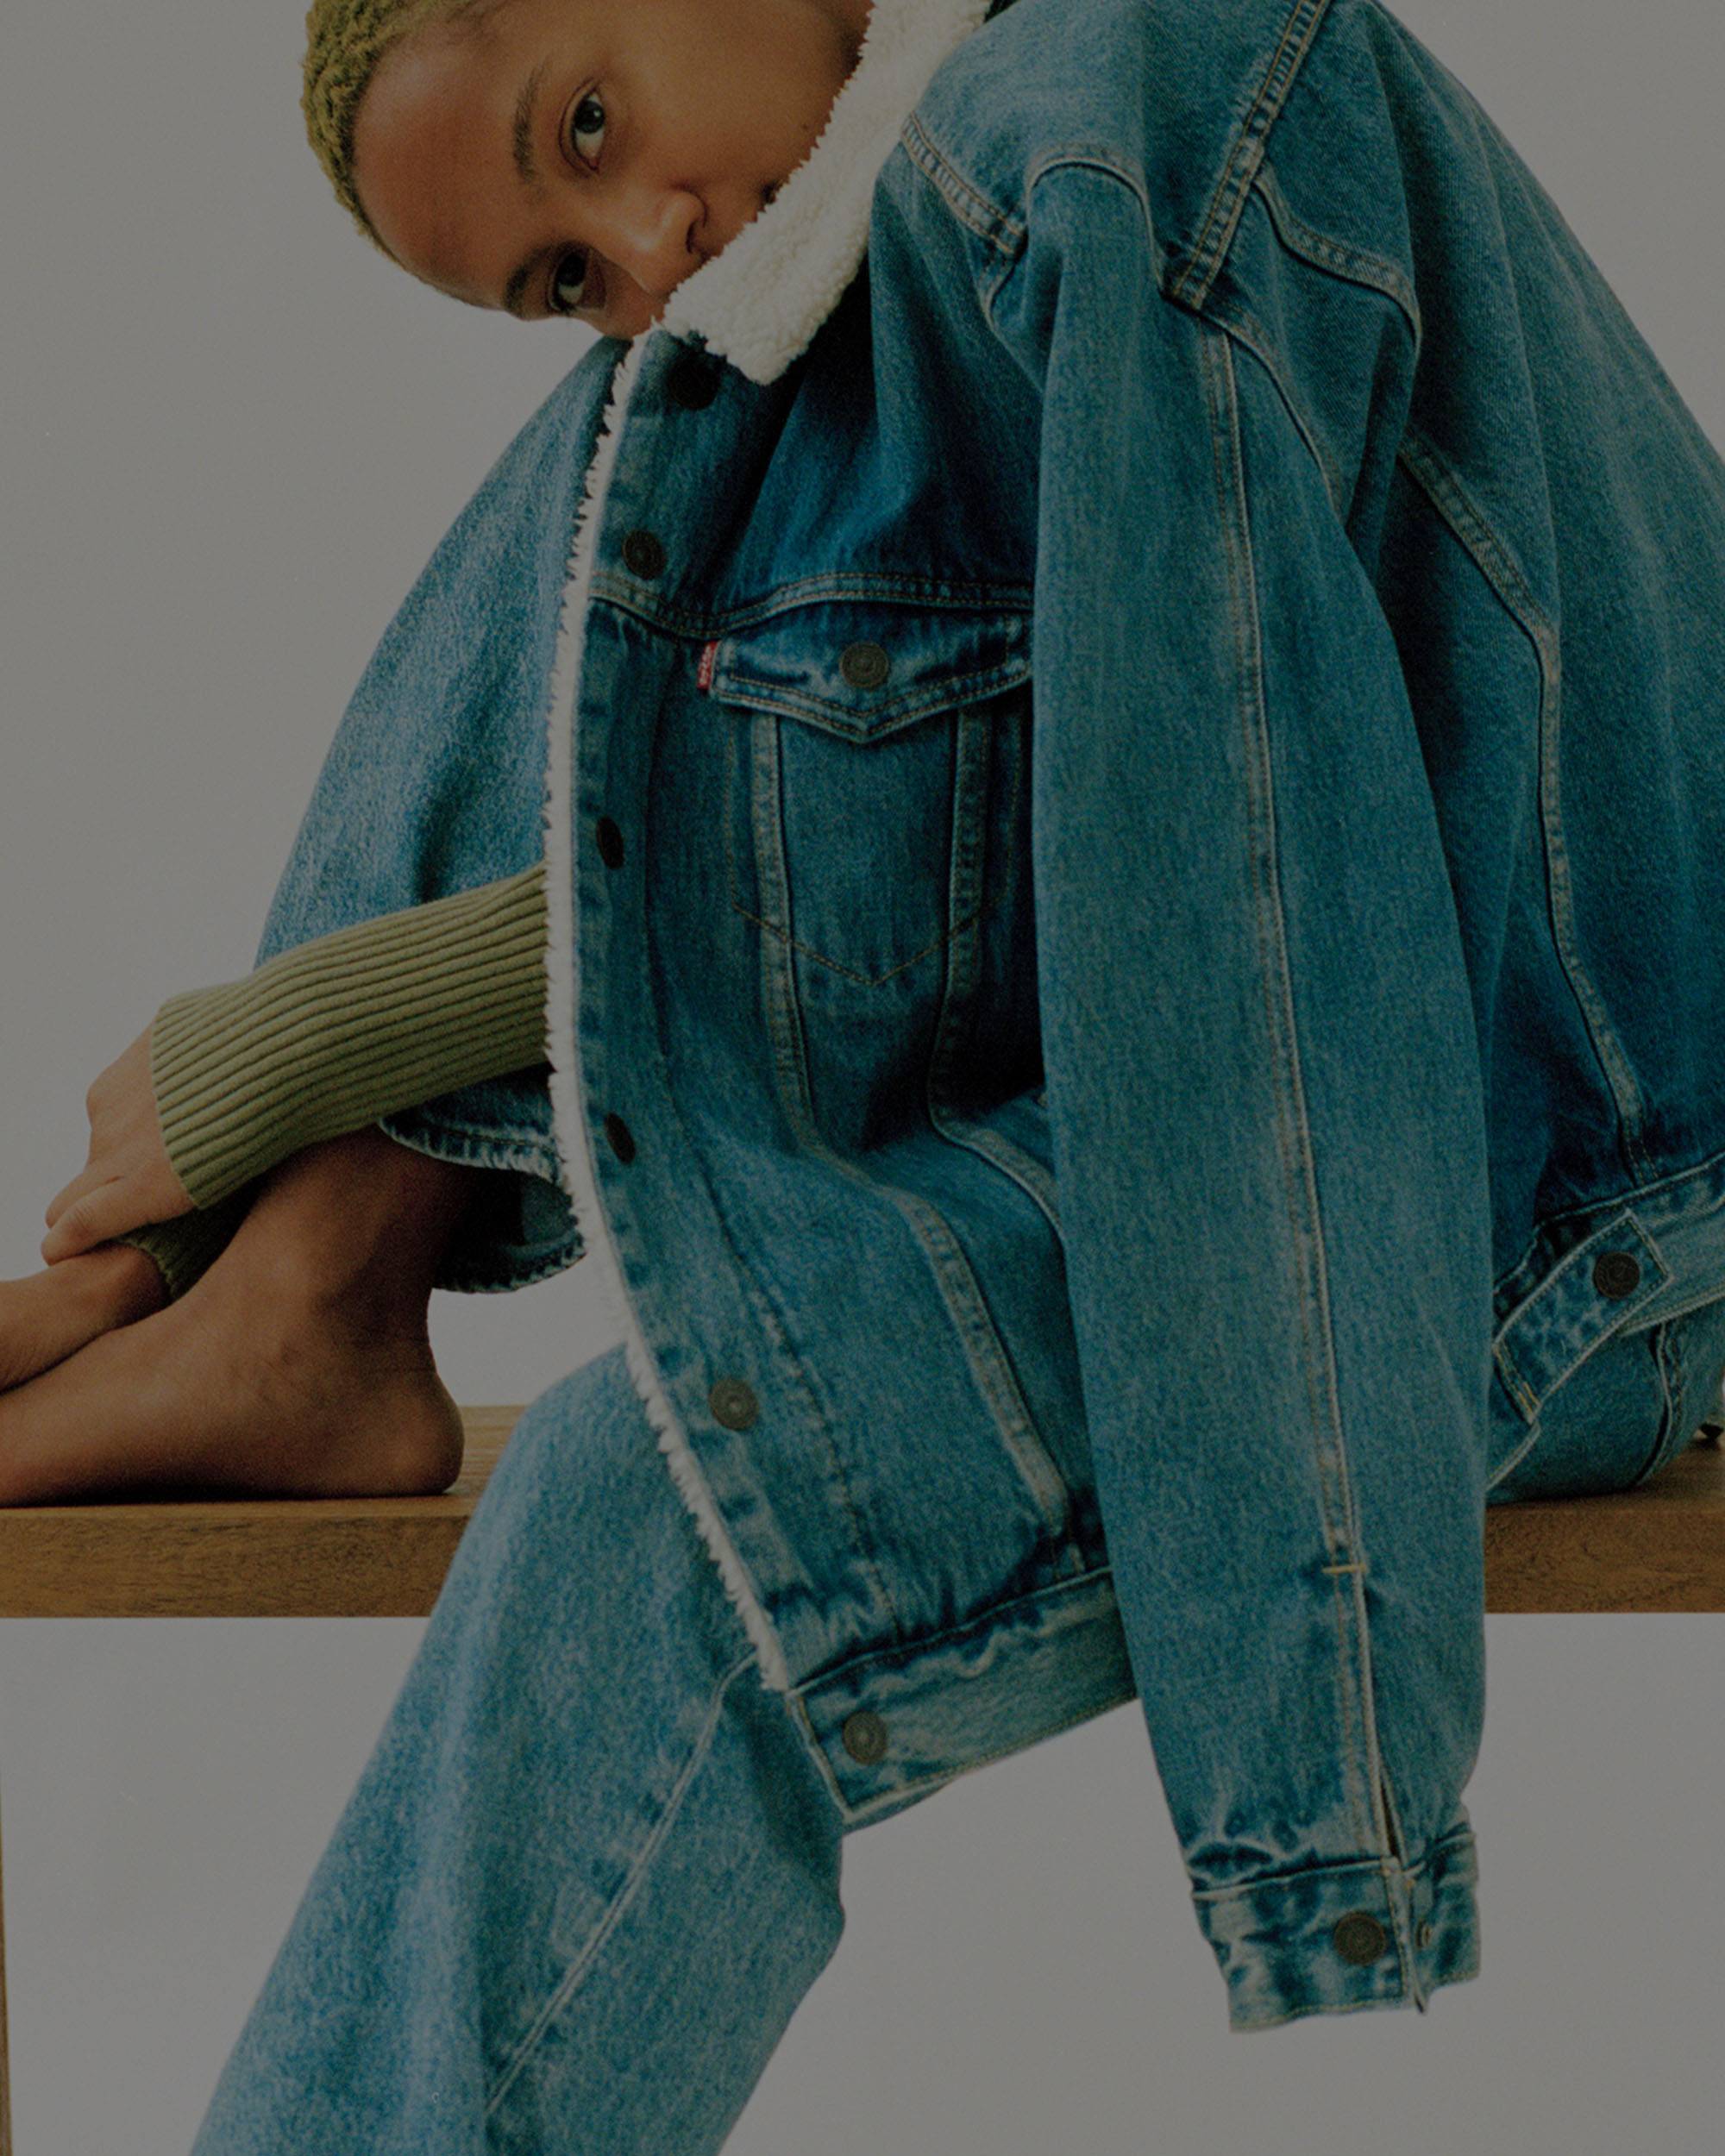 Model in an all denim outfit sitting on a wooden bench